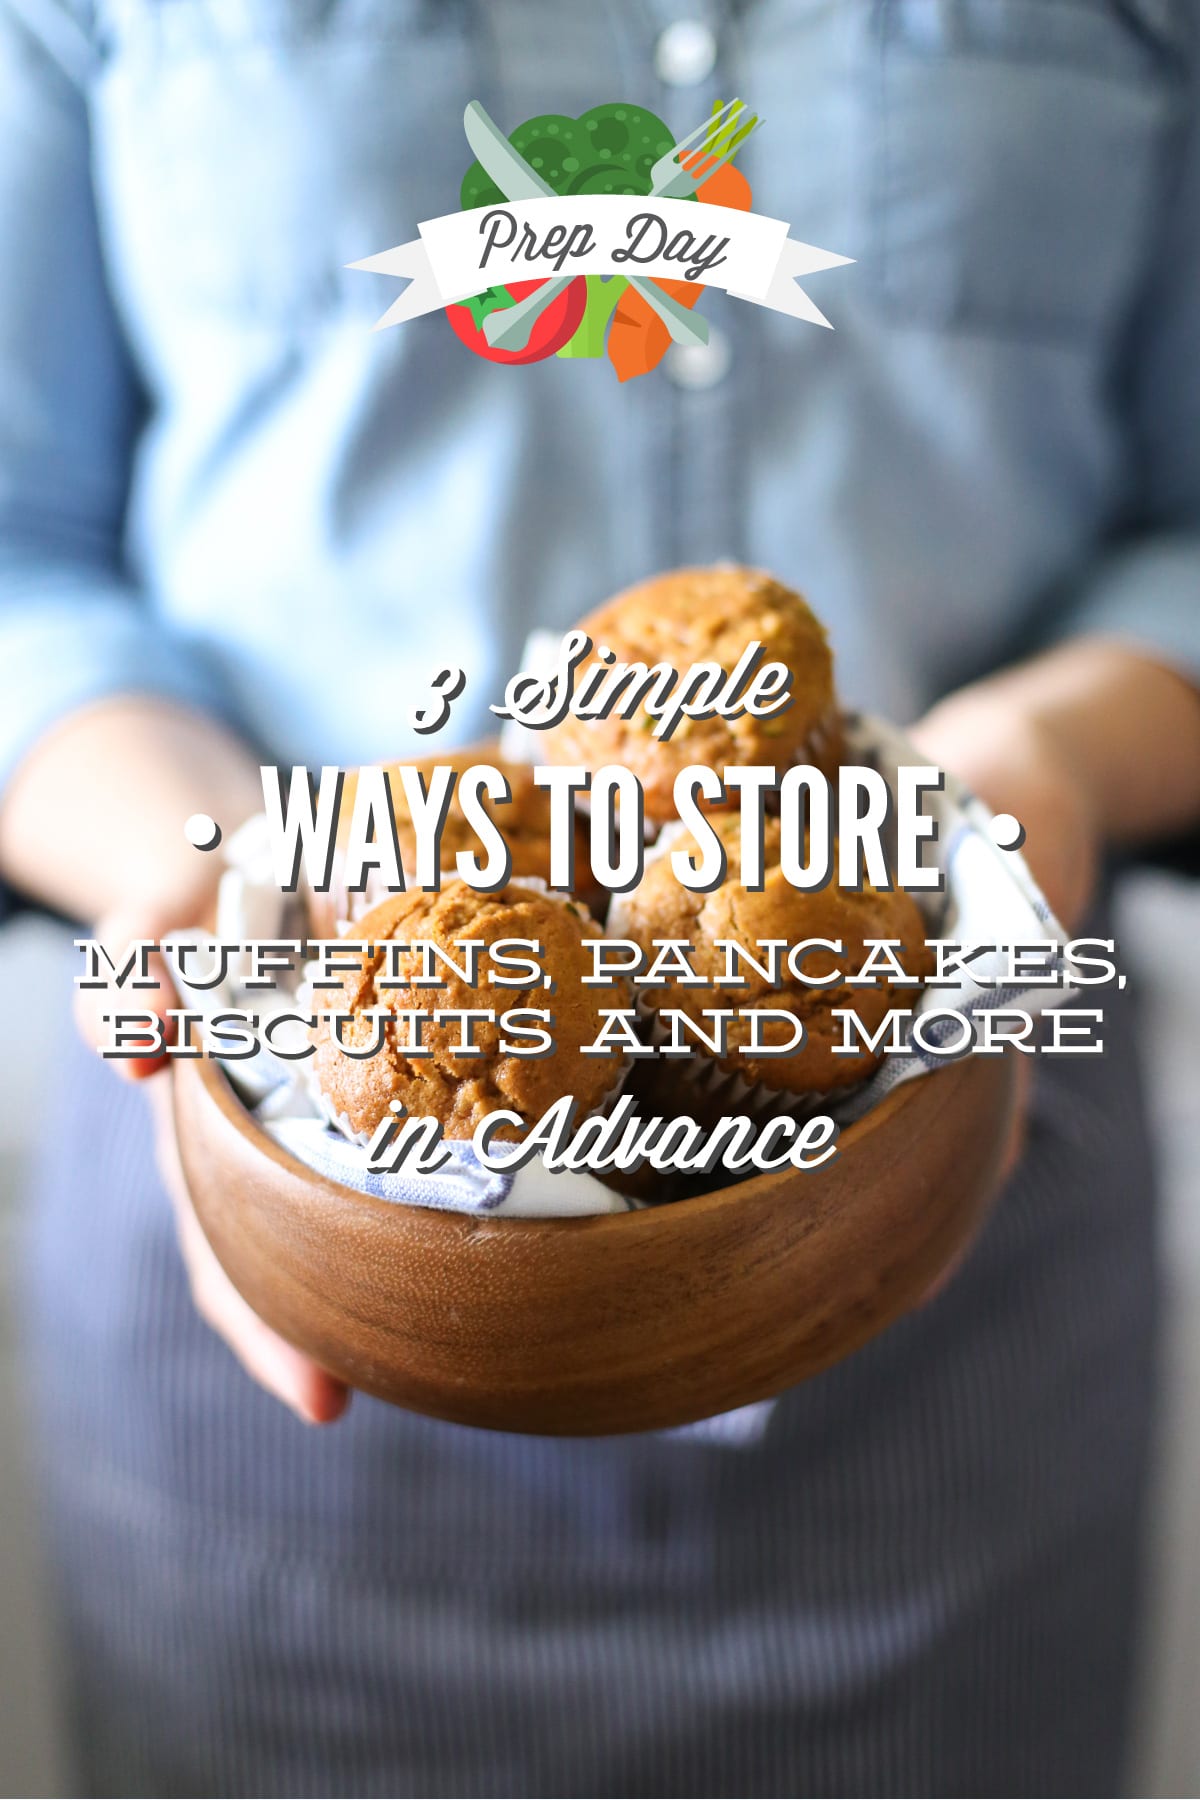 Prep Day: 3 Simple Ways to Store Muffins, Pancakes, Biscuits and More in Advance